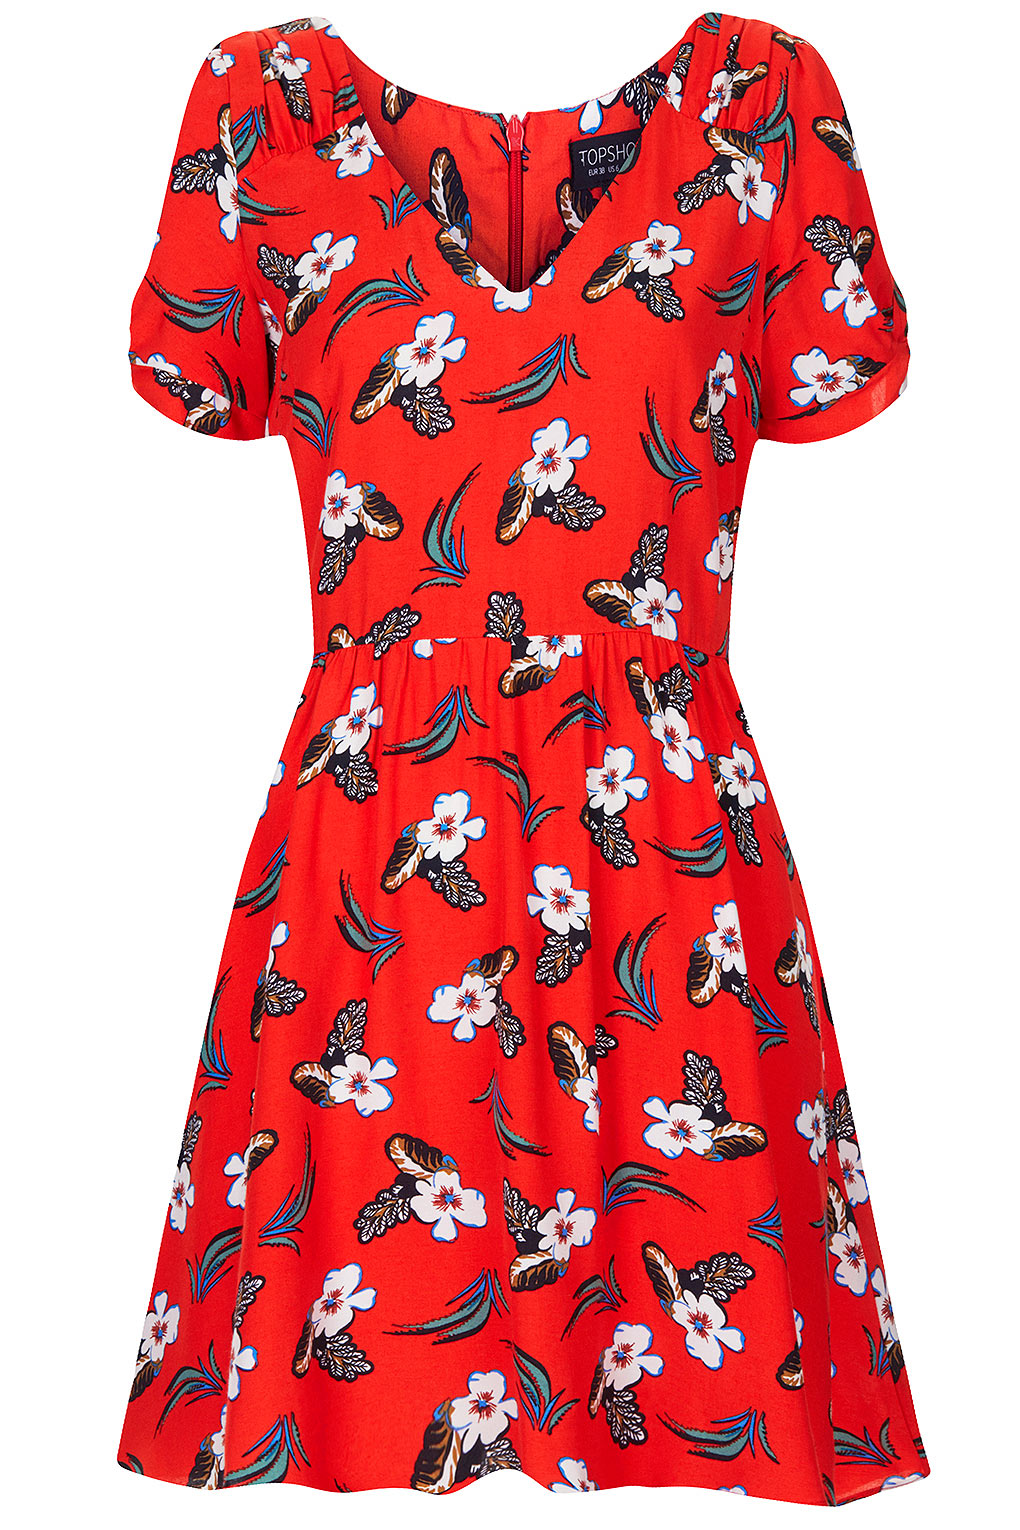 TOPSHOP Little Floral Tea Dress in Red - Lyst